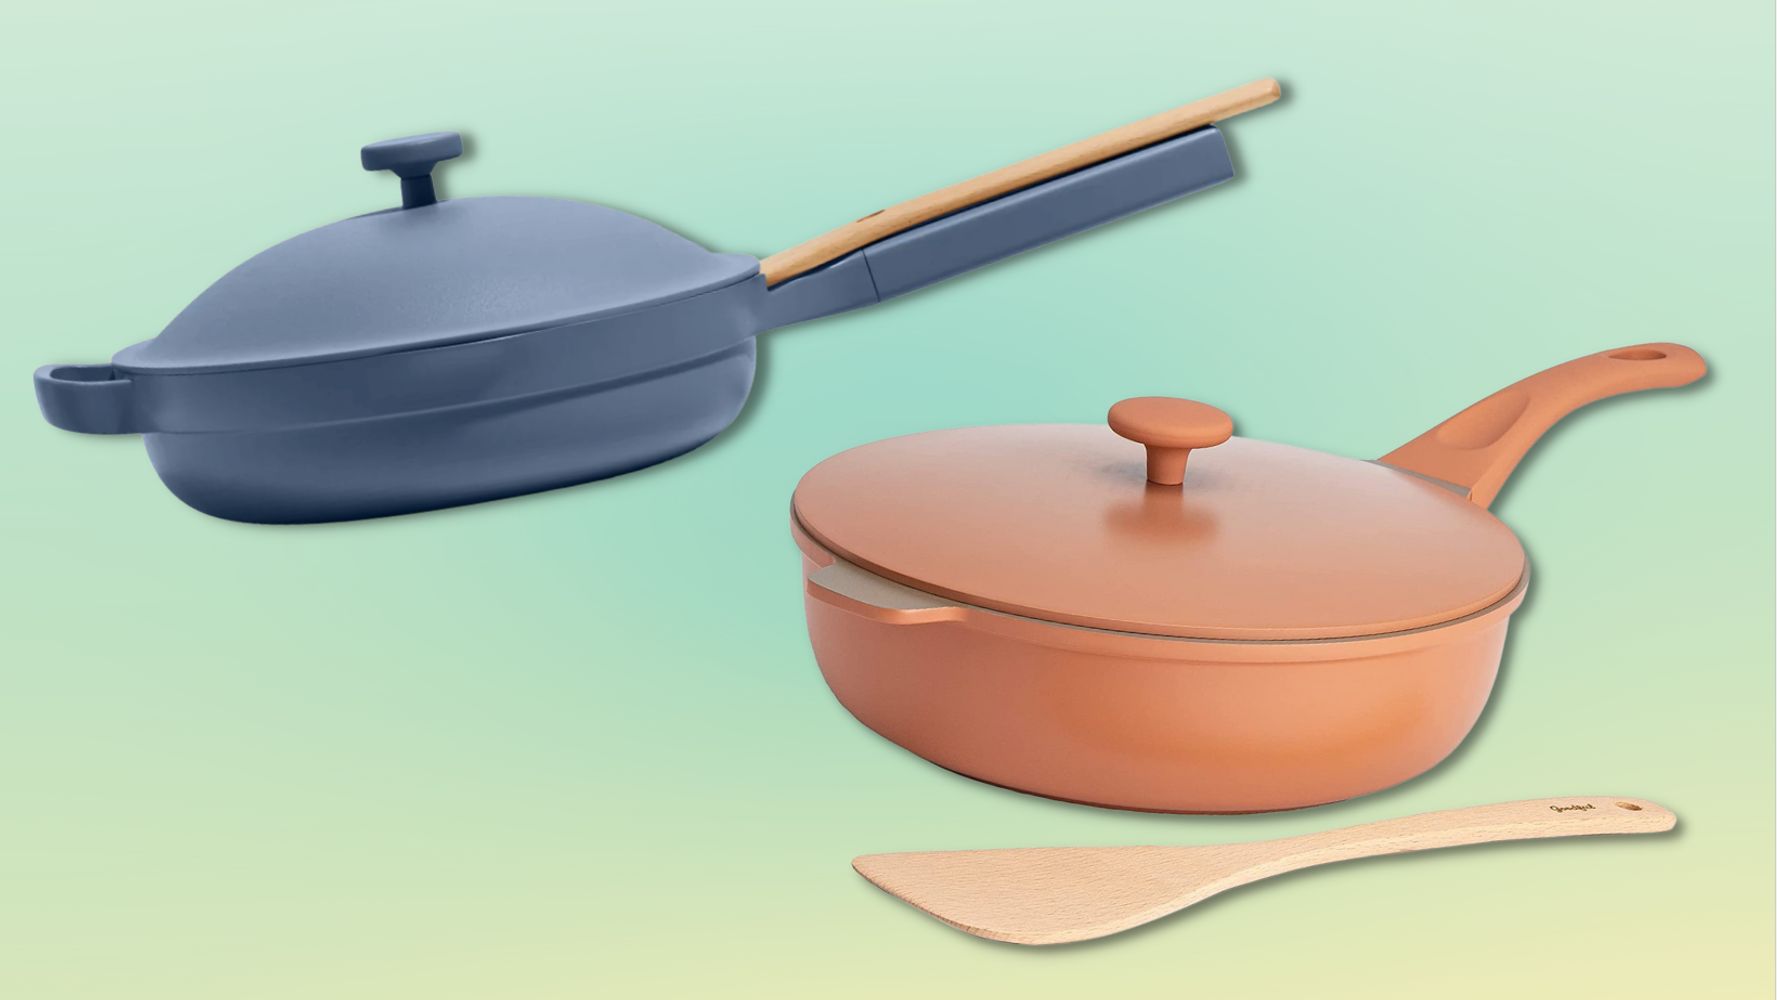 2-in-1 Divided Sauce Pan, Cast Aluminum Cookware